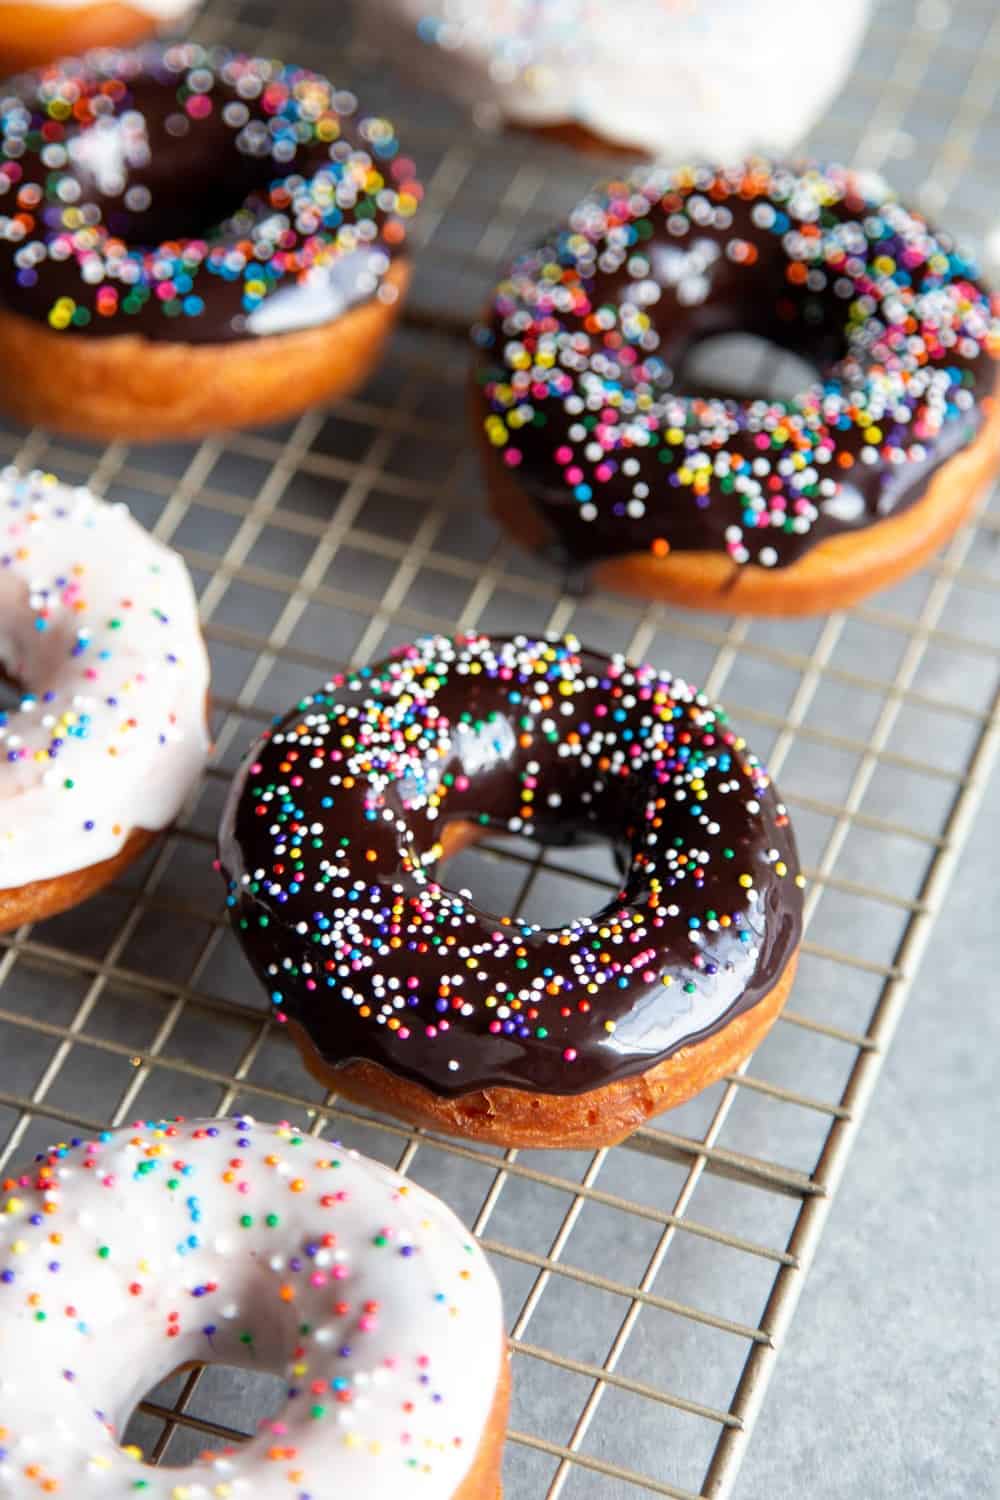 Glazed donuts with sprinkles on a wire rack.